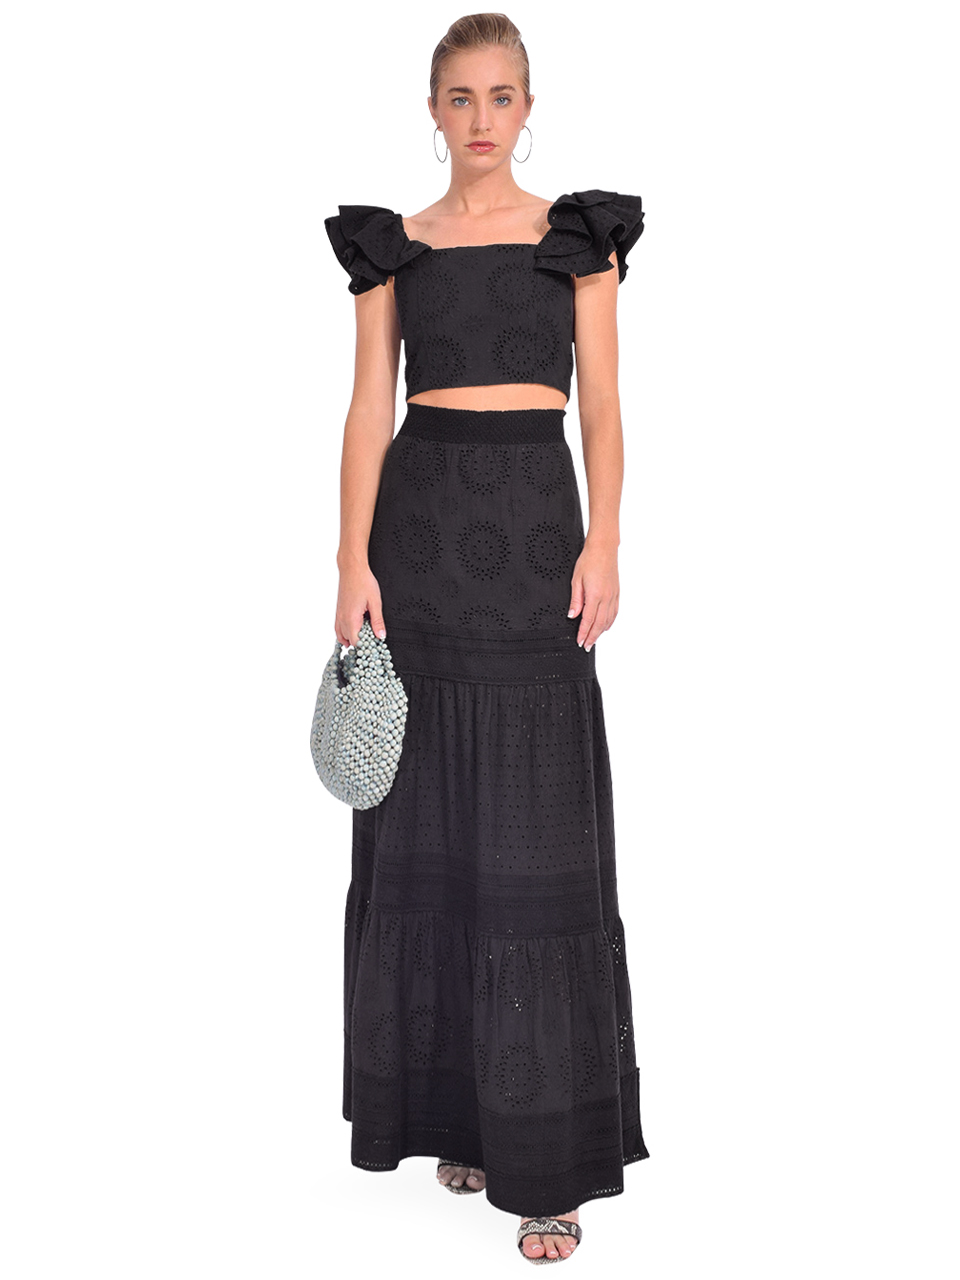 Alice + Olivia Tawny Square Neck Ruffle Crop Top in Black Full Outfit Full Outfit 